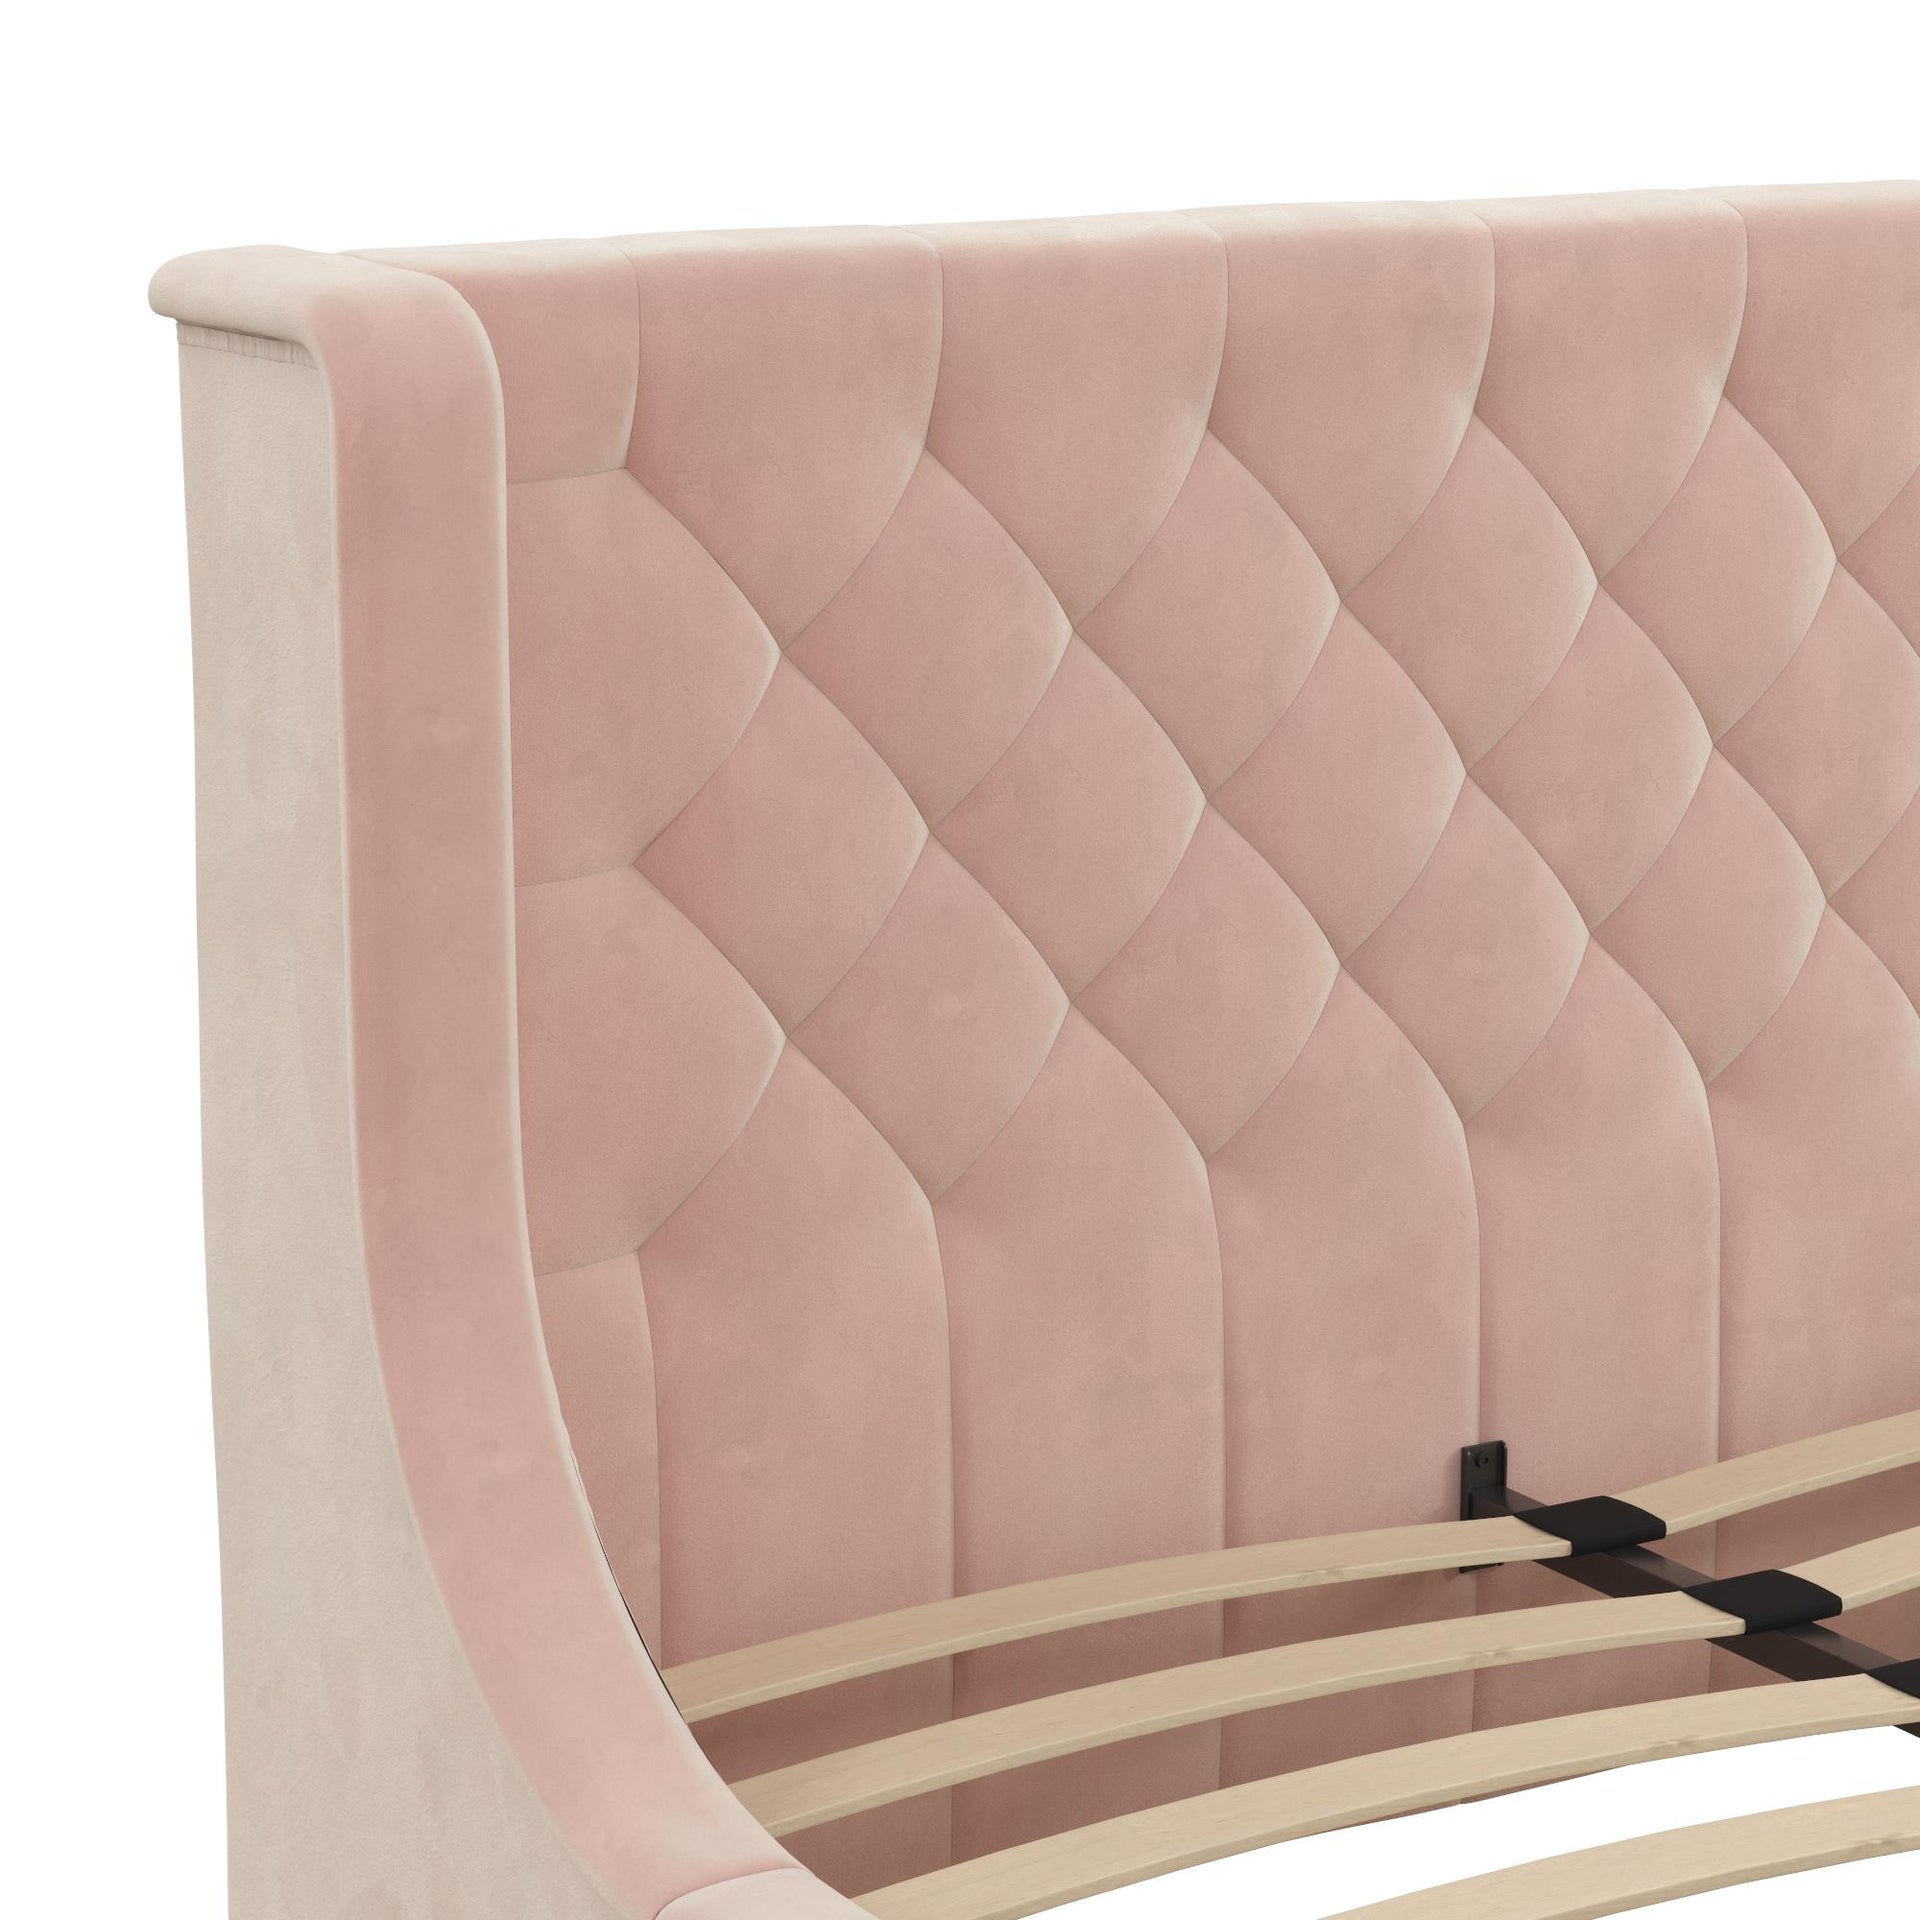 Little Seeds Monarch Hill Ambrosia Upholstered Bed - Pink - Full